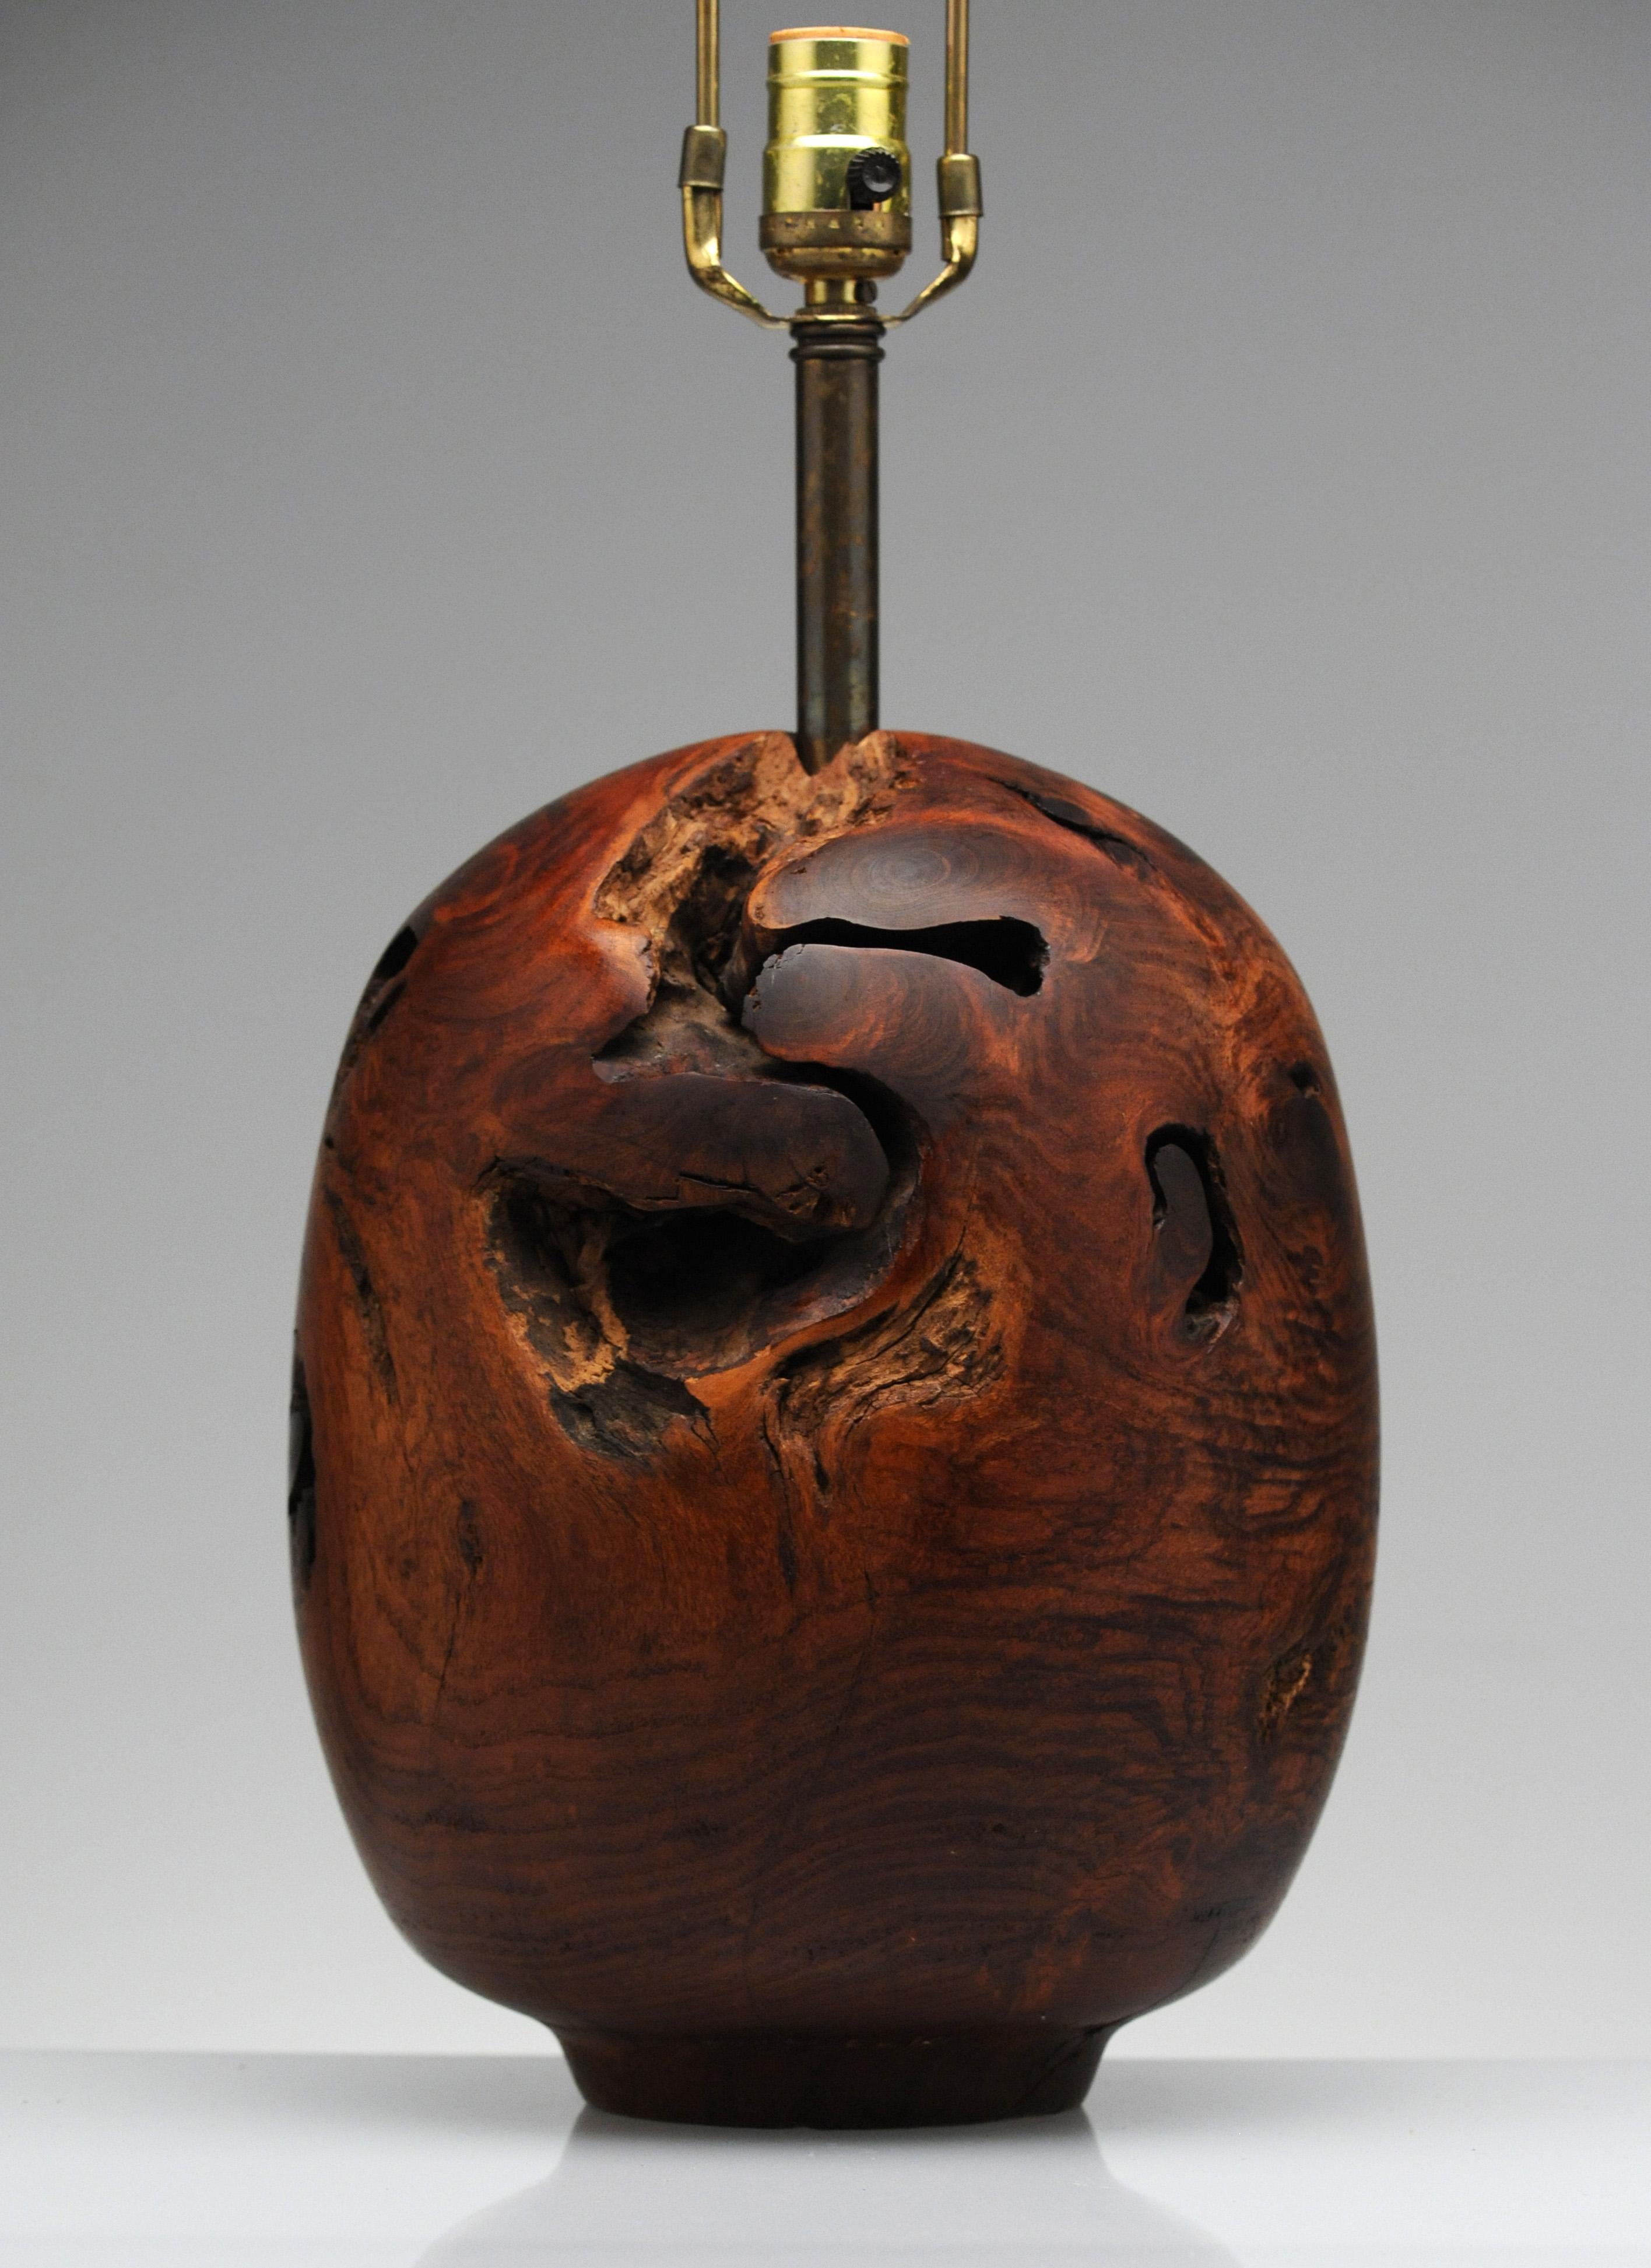 Wood Organic Sculpture Turned Mesquite Table Lamp by Chris Eggers